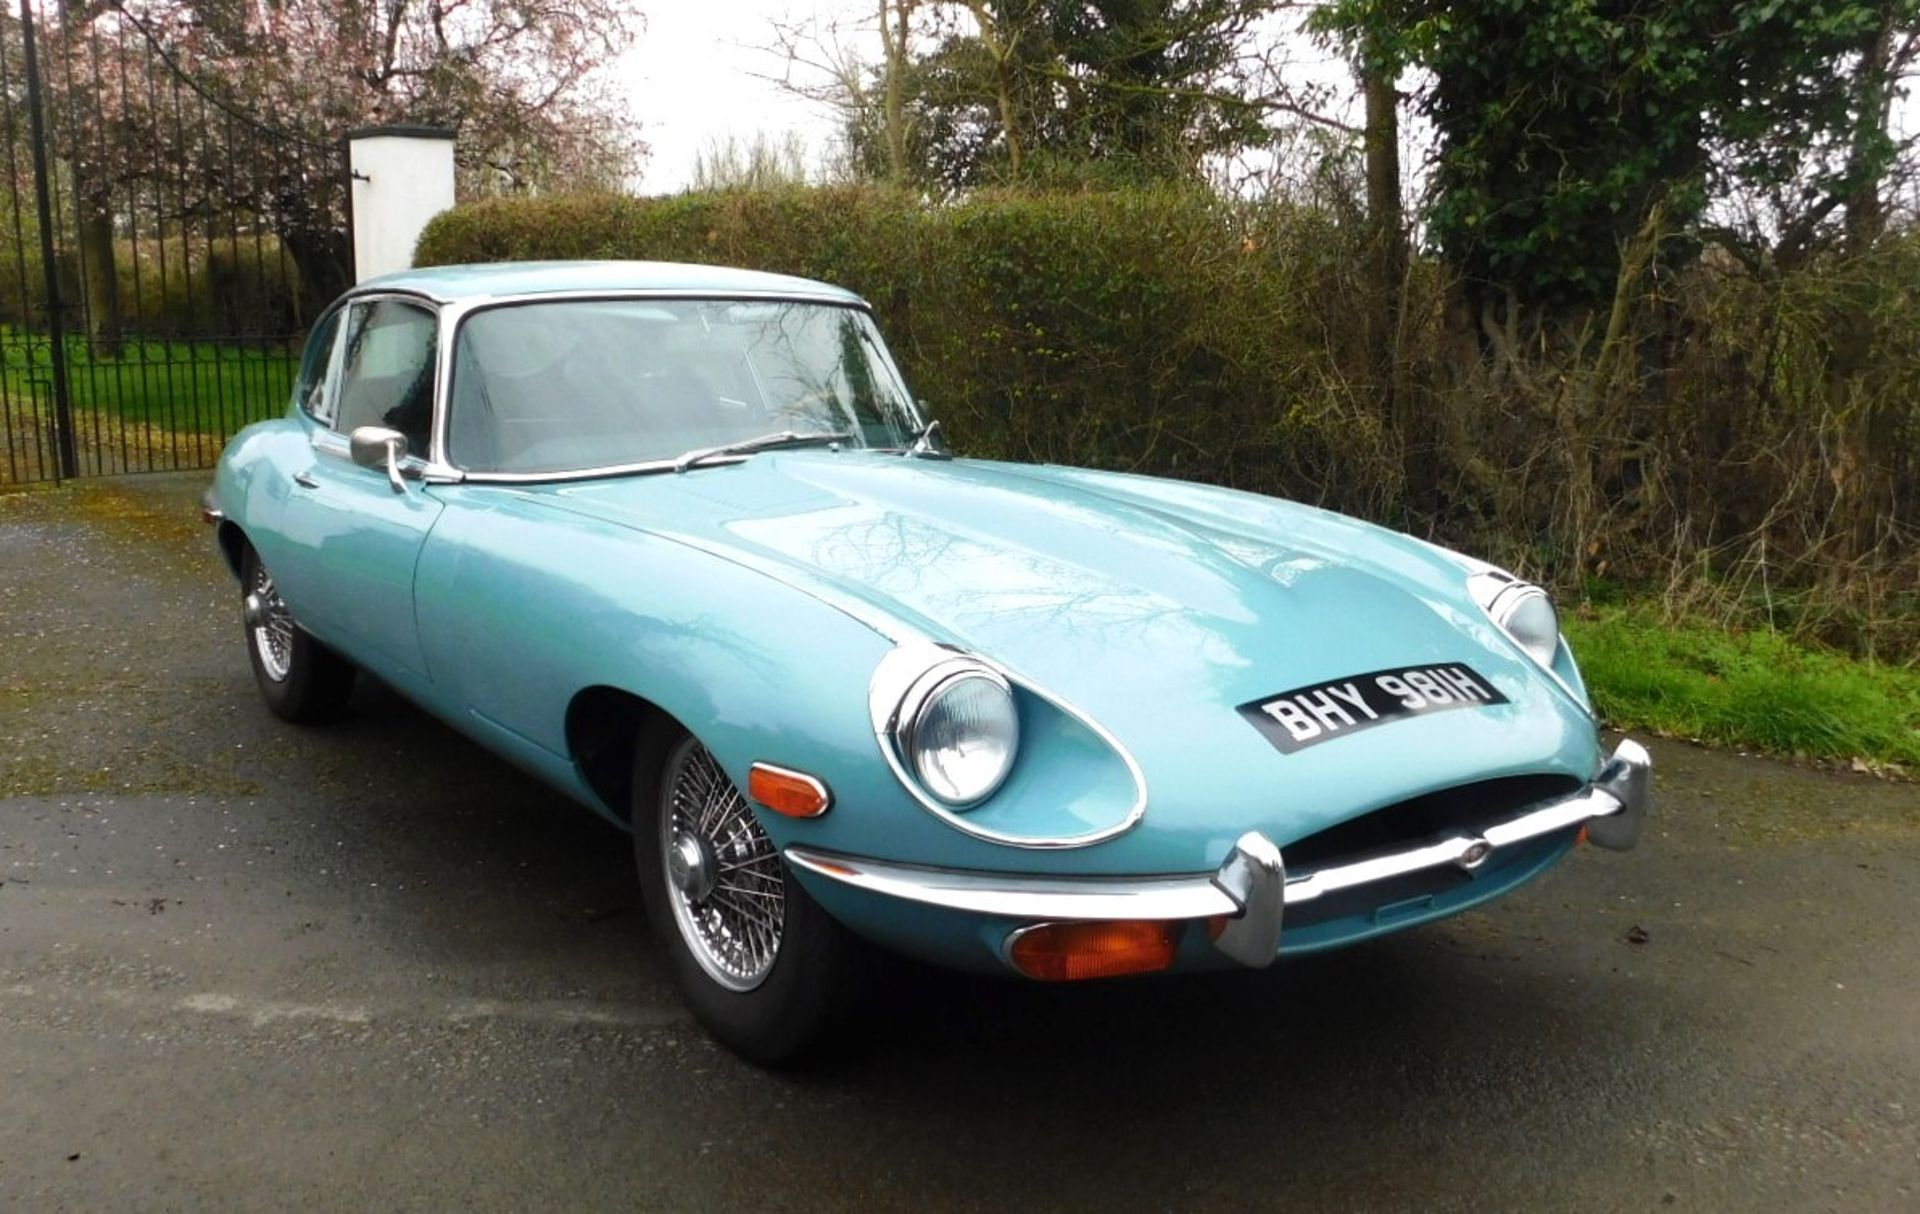 1970 JAGUAR E-TYPE SERIES II 2+2 COUPE Registration Number: BHY 981H Chassis Number: P1R44144BW - Image 2 of 33